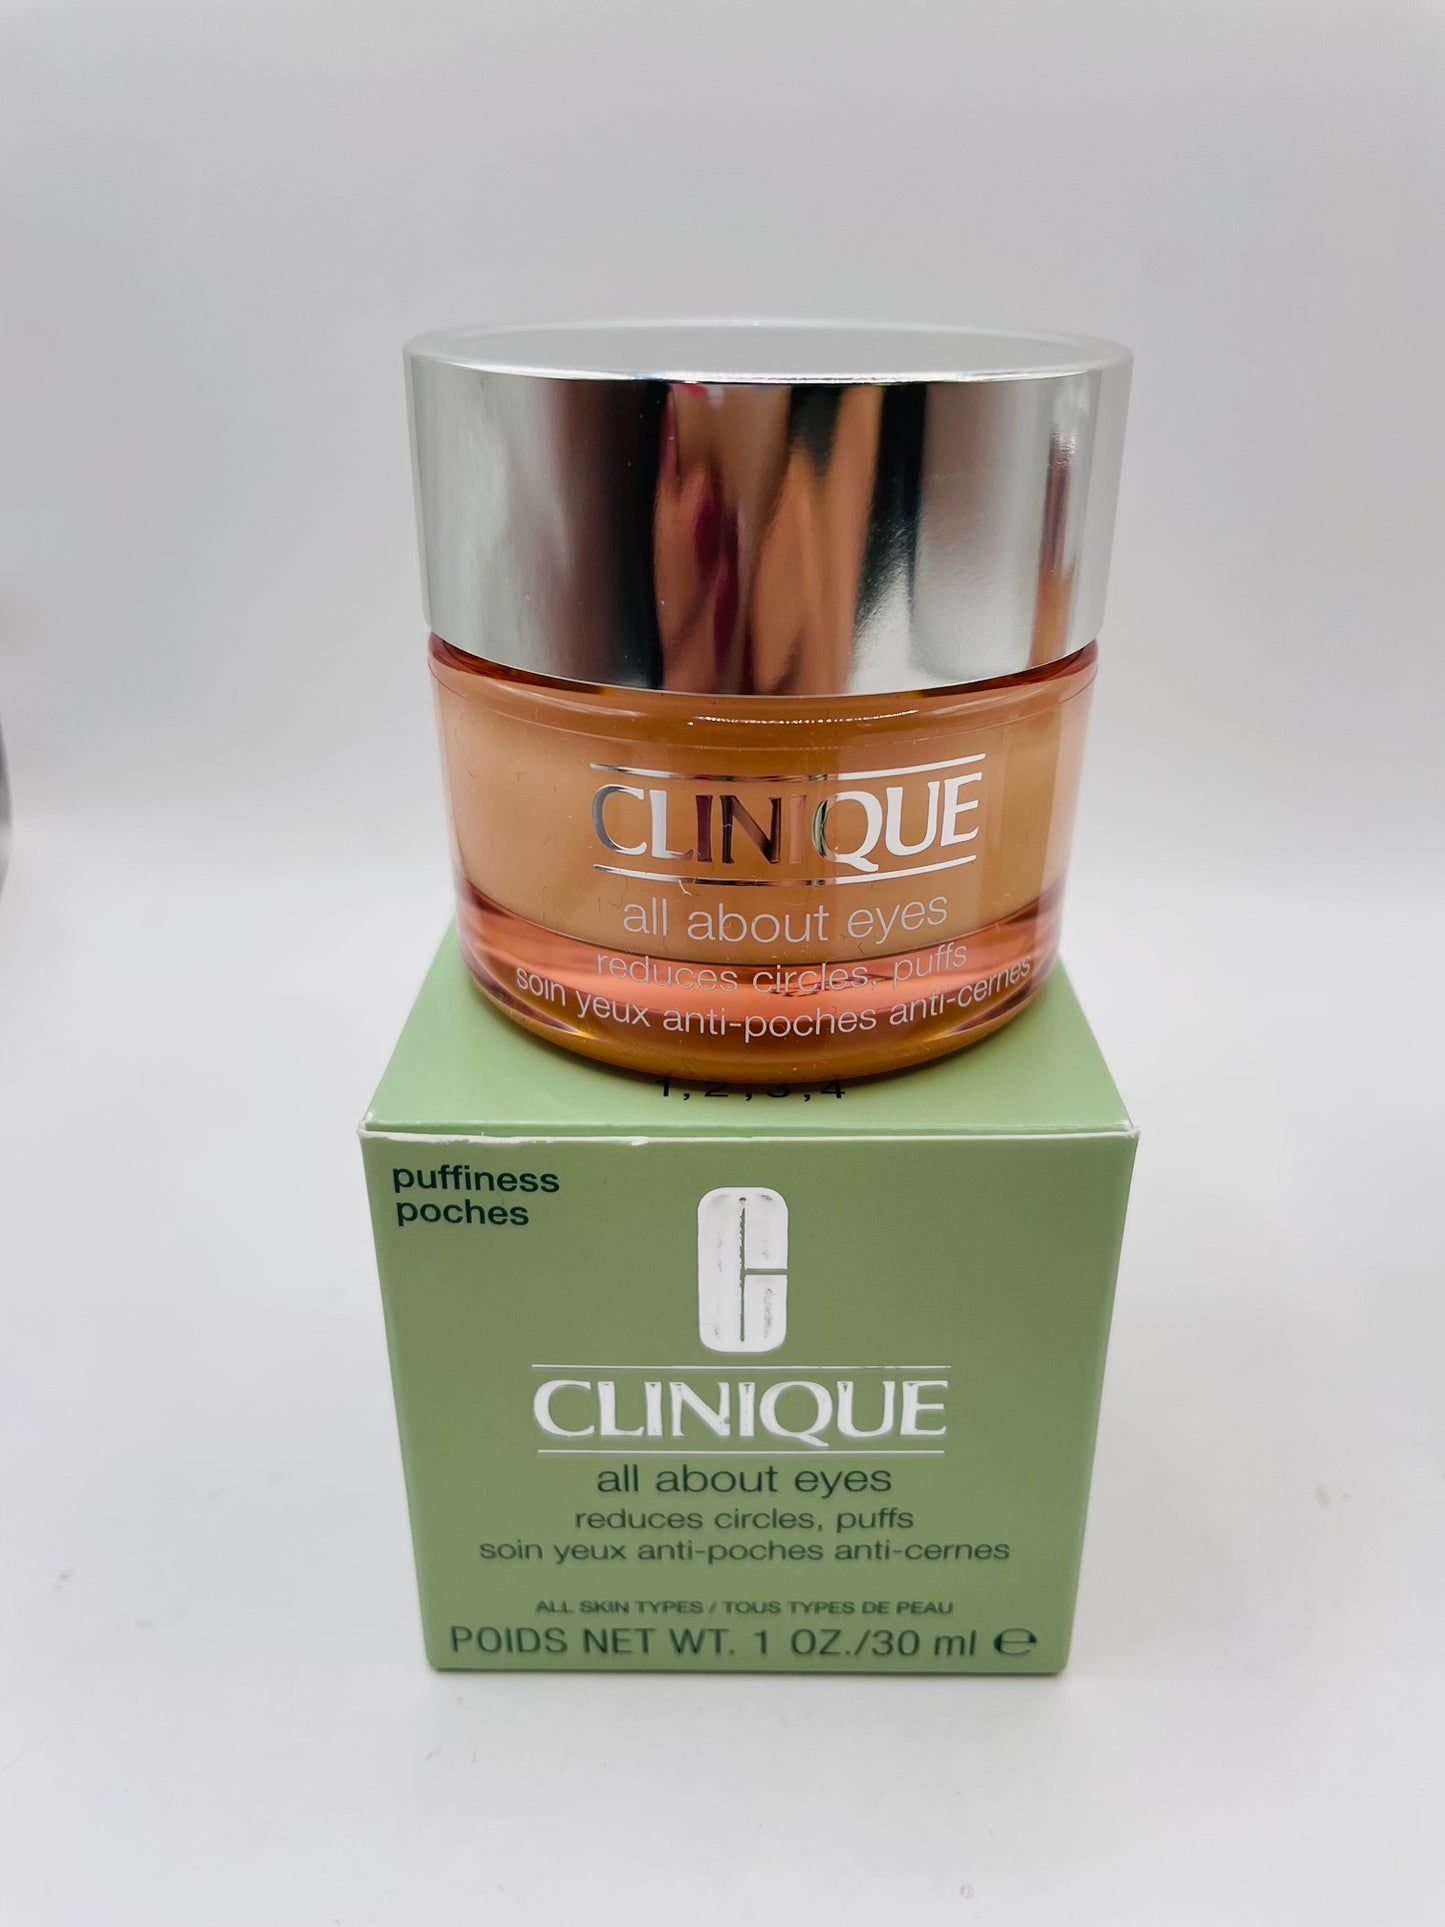 Clinique all about eye